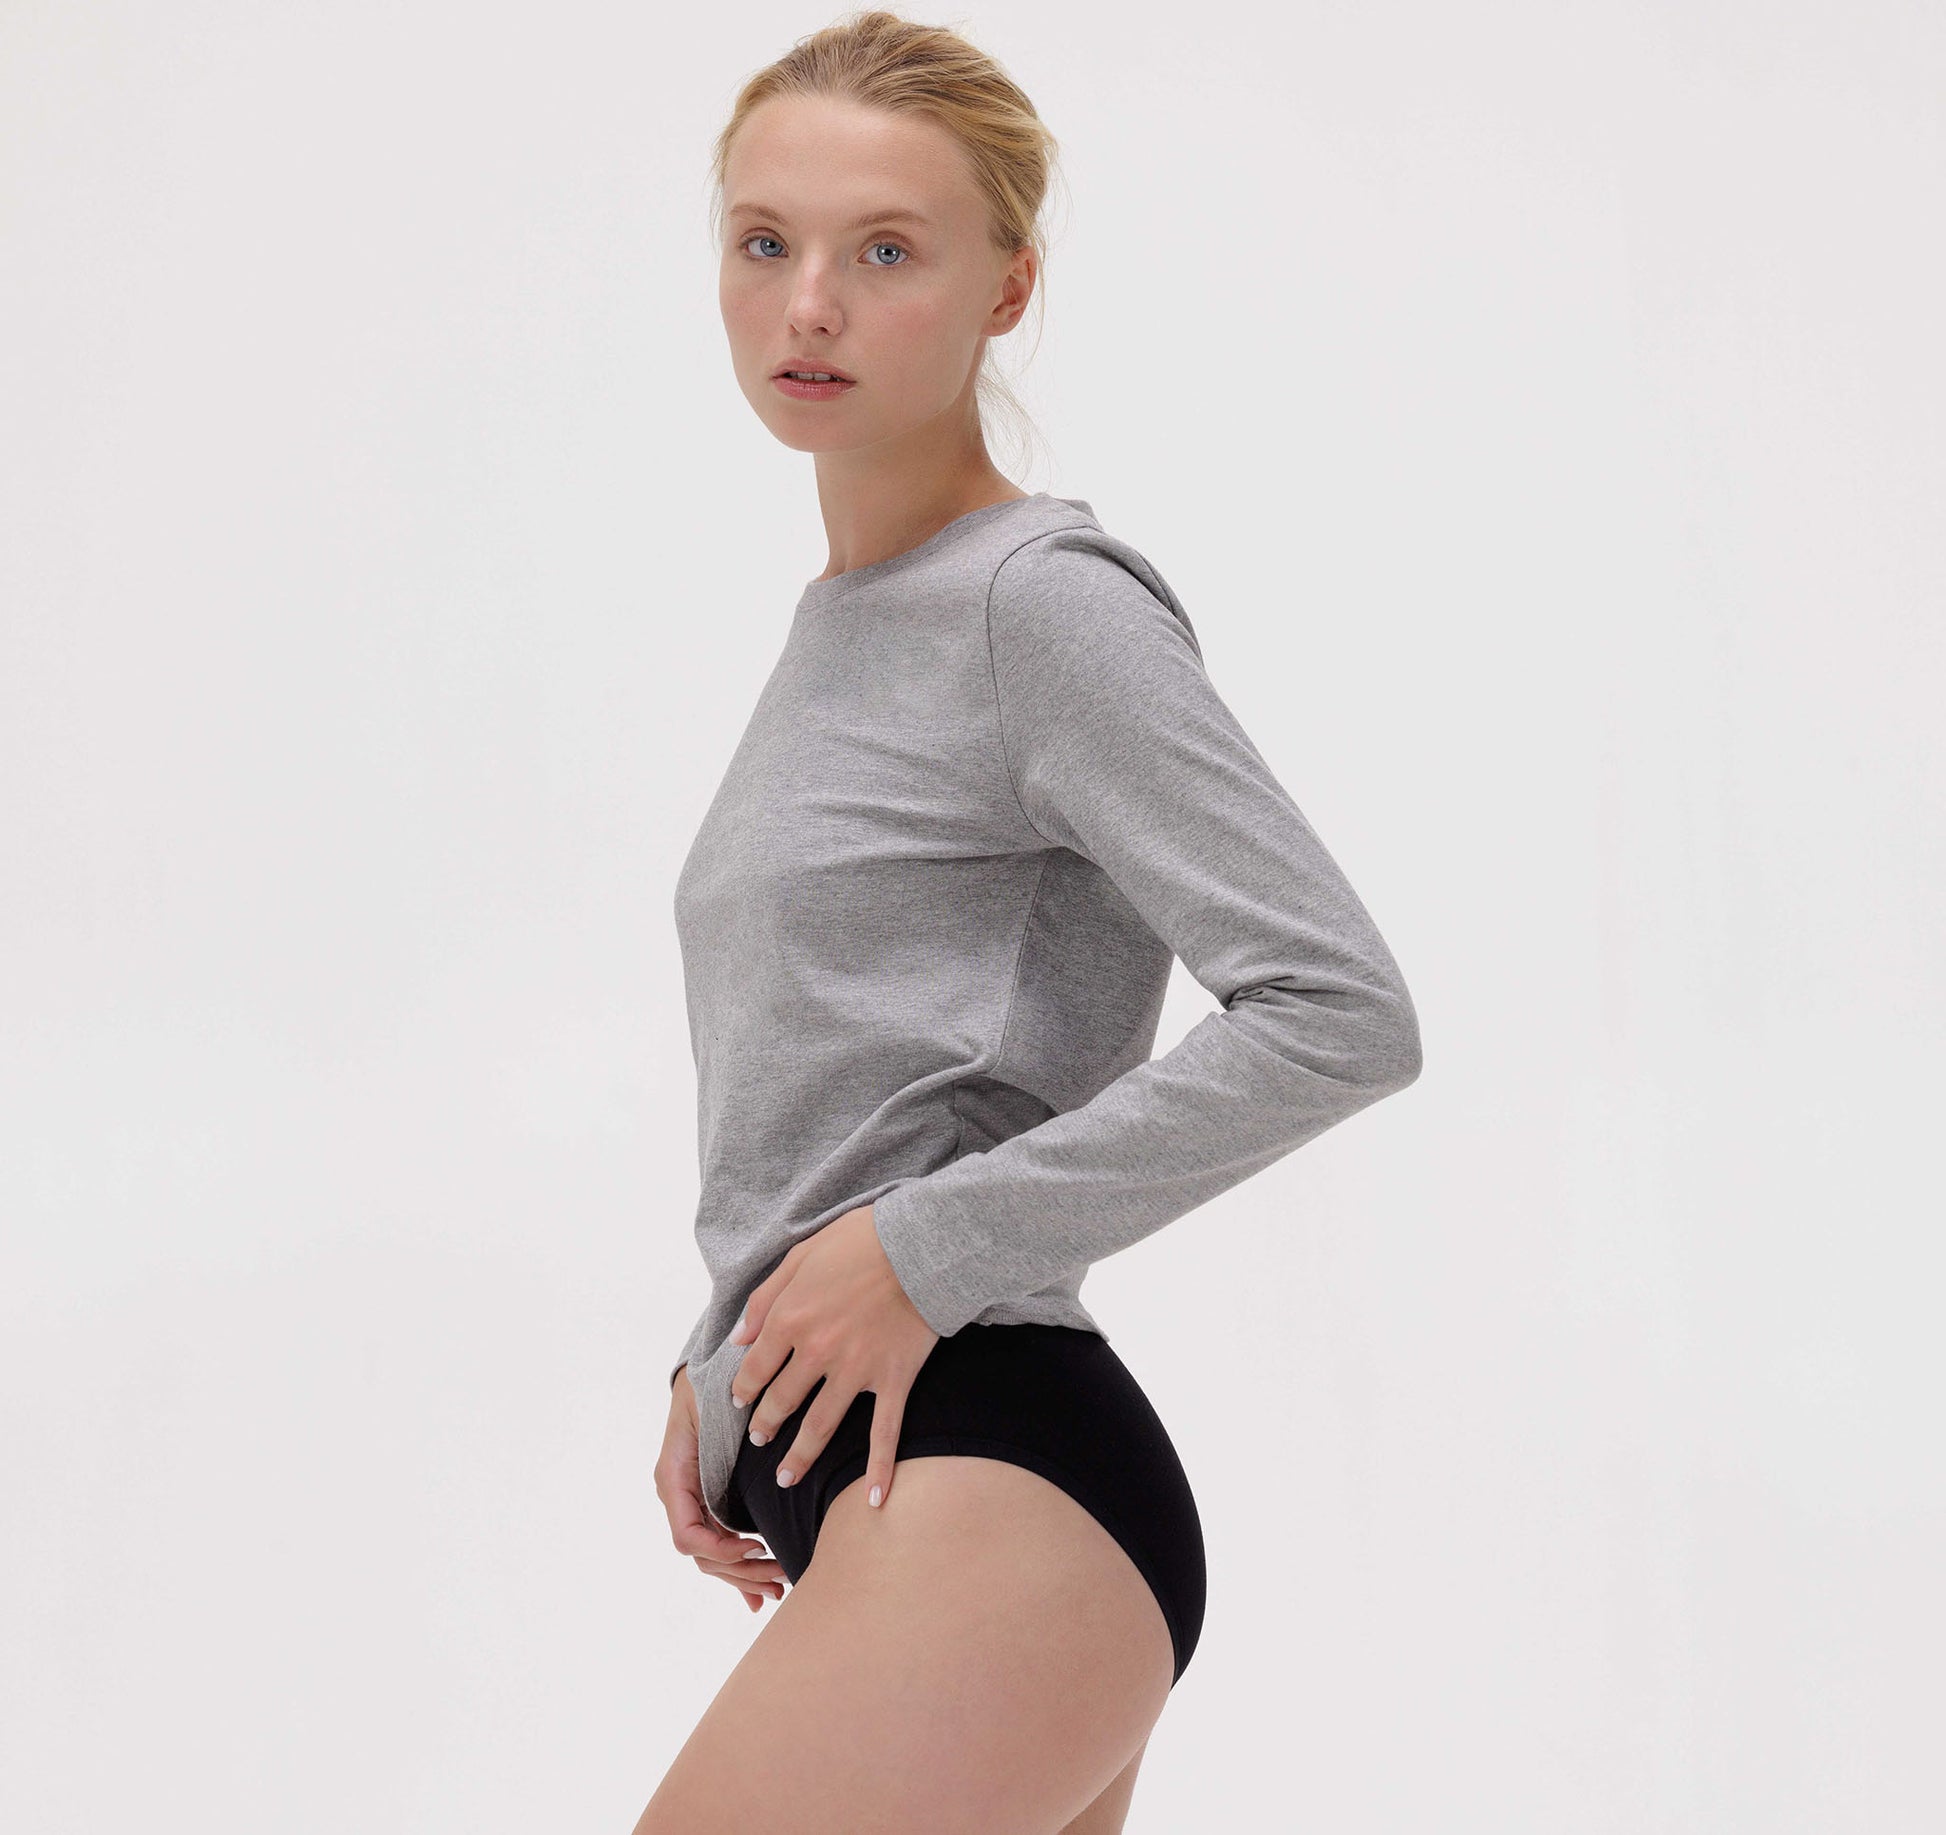 Women's Everyday Long Sleeve Bodysuit made with Organic Cotton